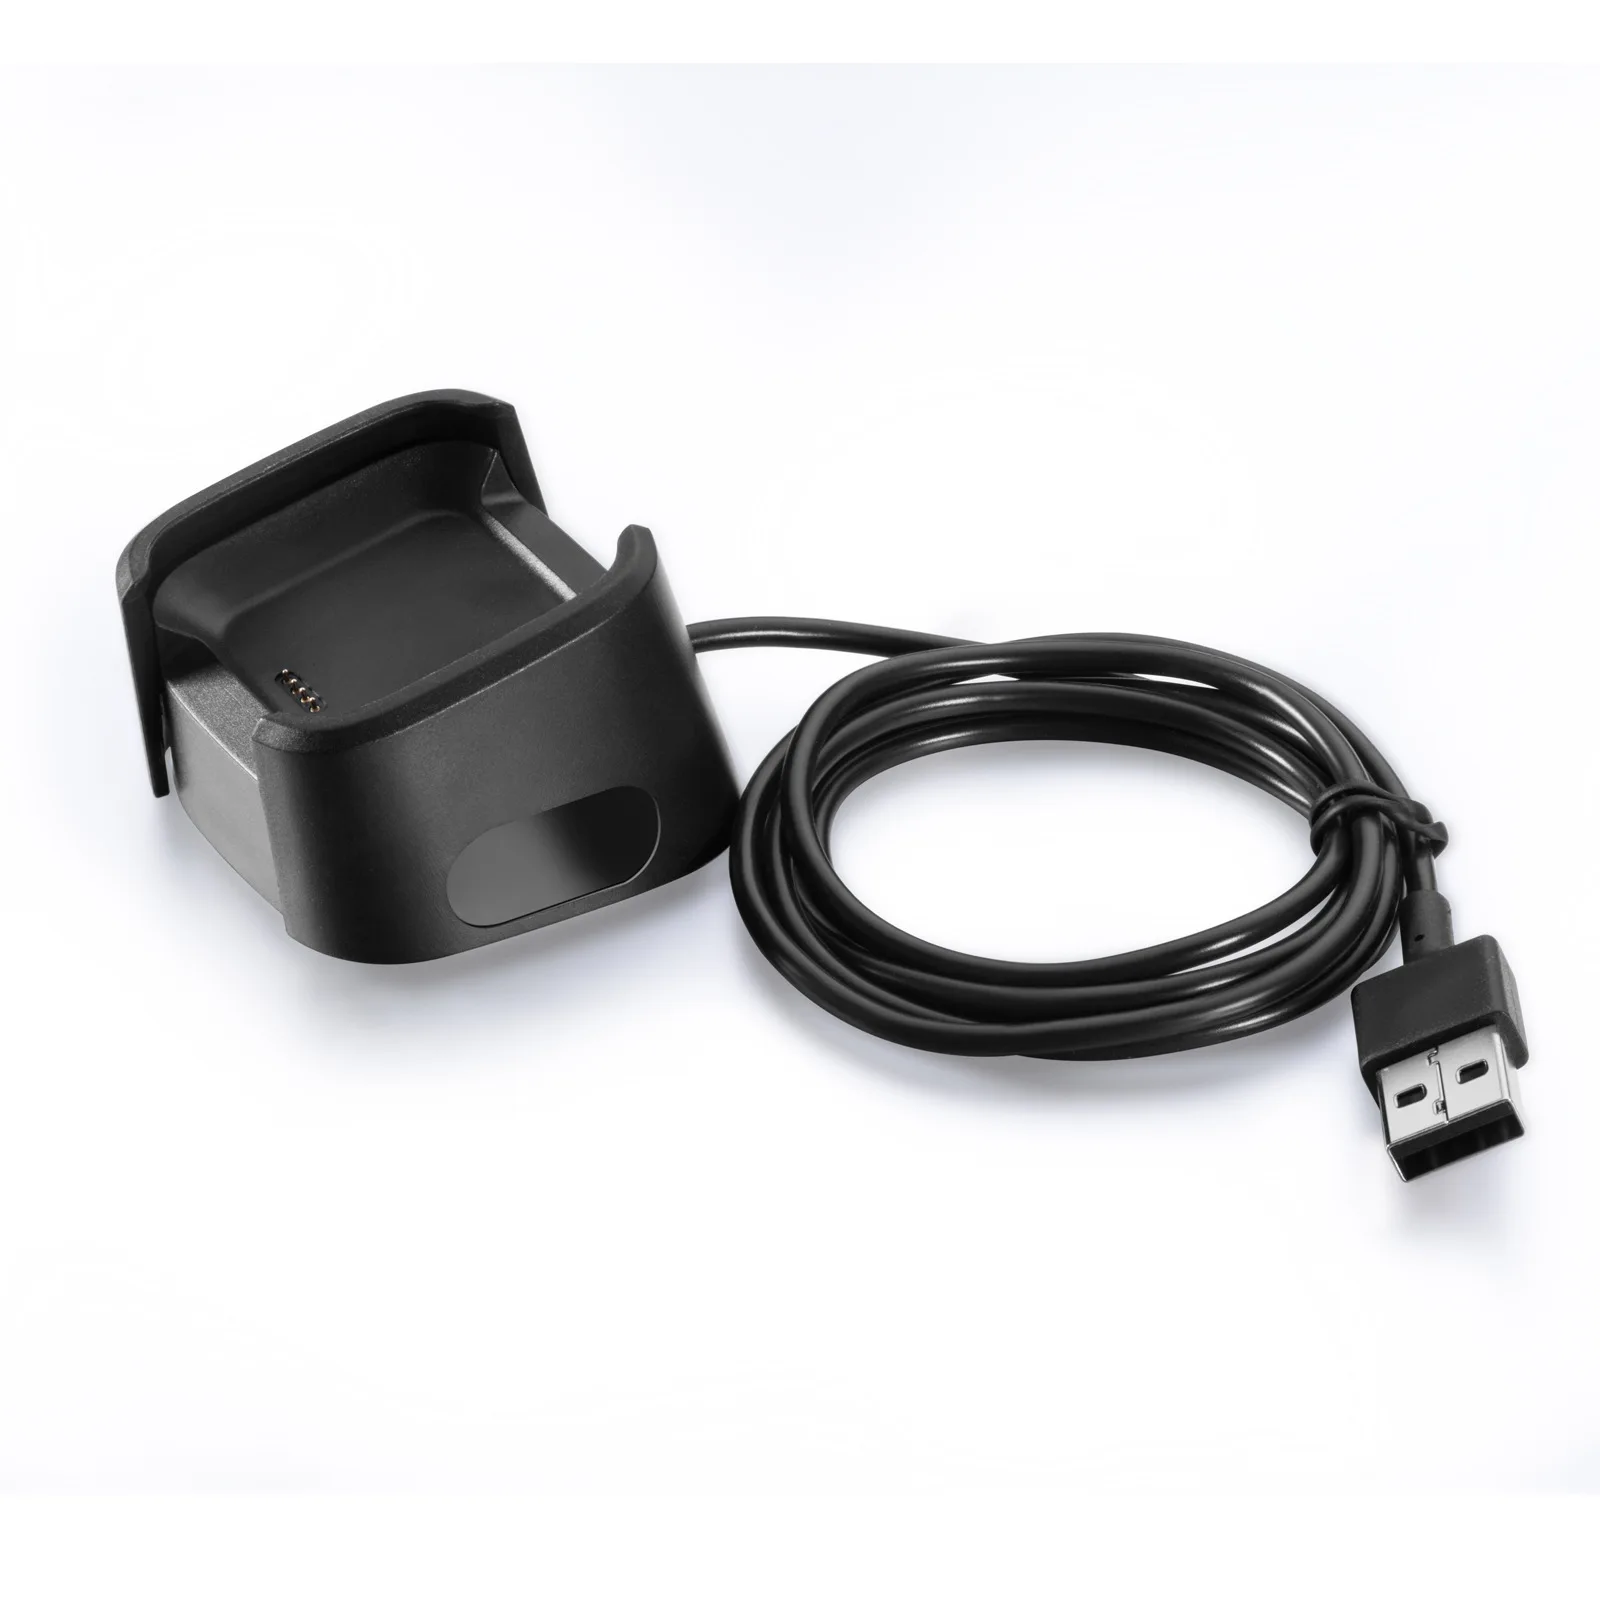 

1m USB Charger for Fitbit versa Charging Cable Dock for fitbit versa lite Smart Watch Accessories Adapter replace Charge Cradle